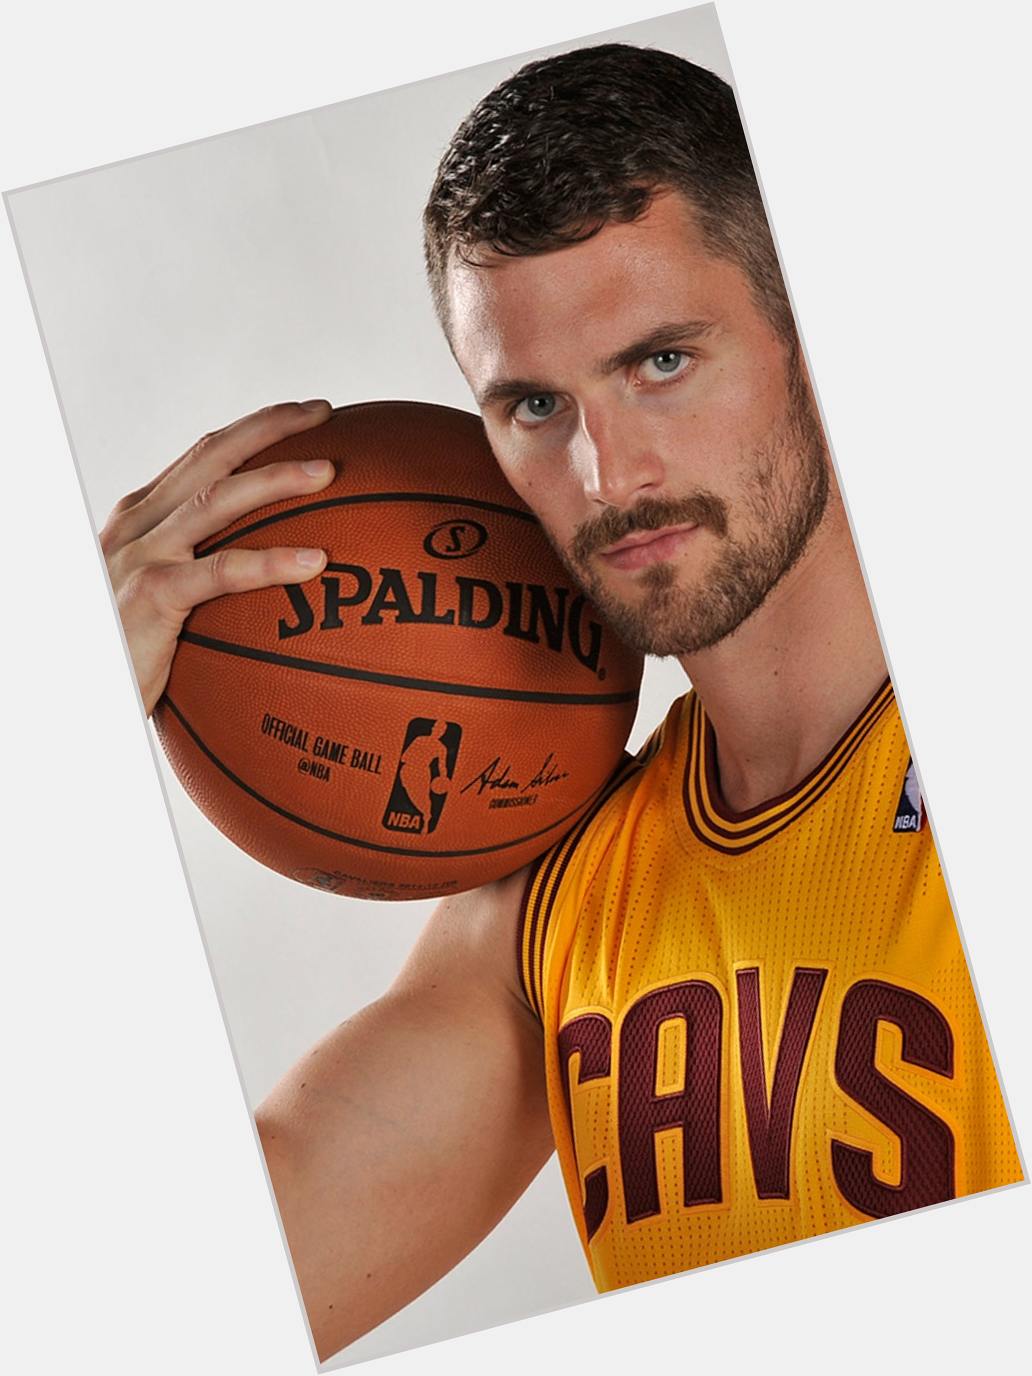 <a href="/hot-men/kevin-love/is-he-healthy-married-still-injured-injury-prone">Kevin Love</a> Athletic body,  dark brown hair & hairstyles